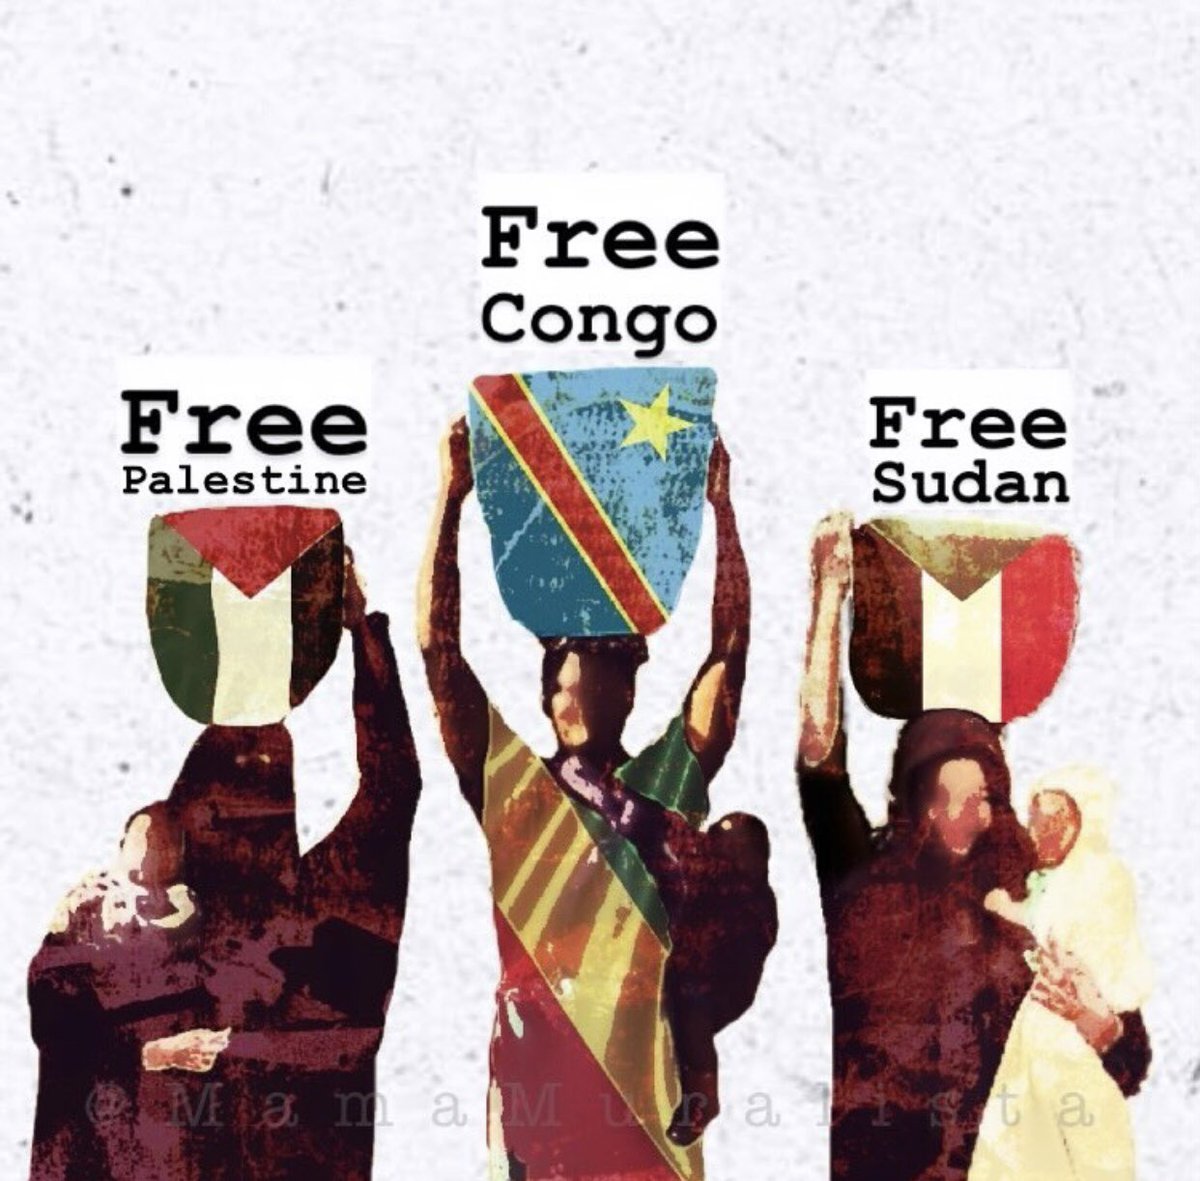 free palestine. free congo. free sudan. 

 free EVERY single country facing genocide, hardships and suffering.